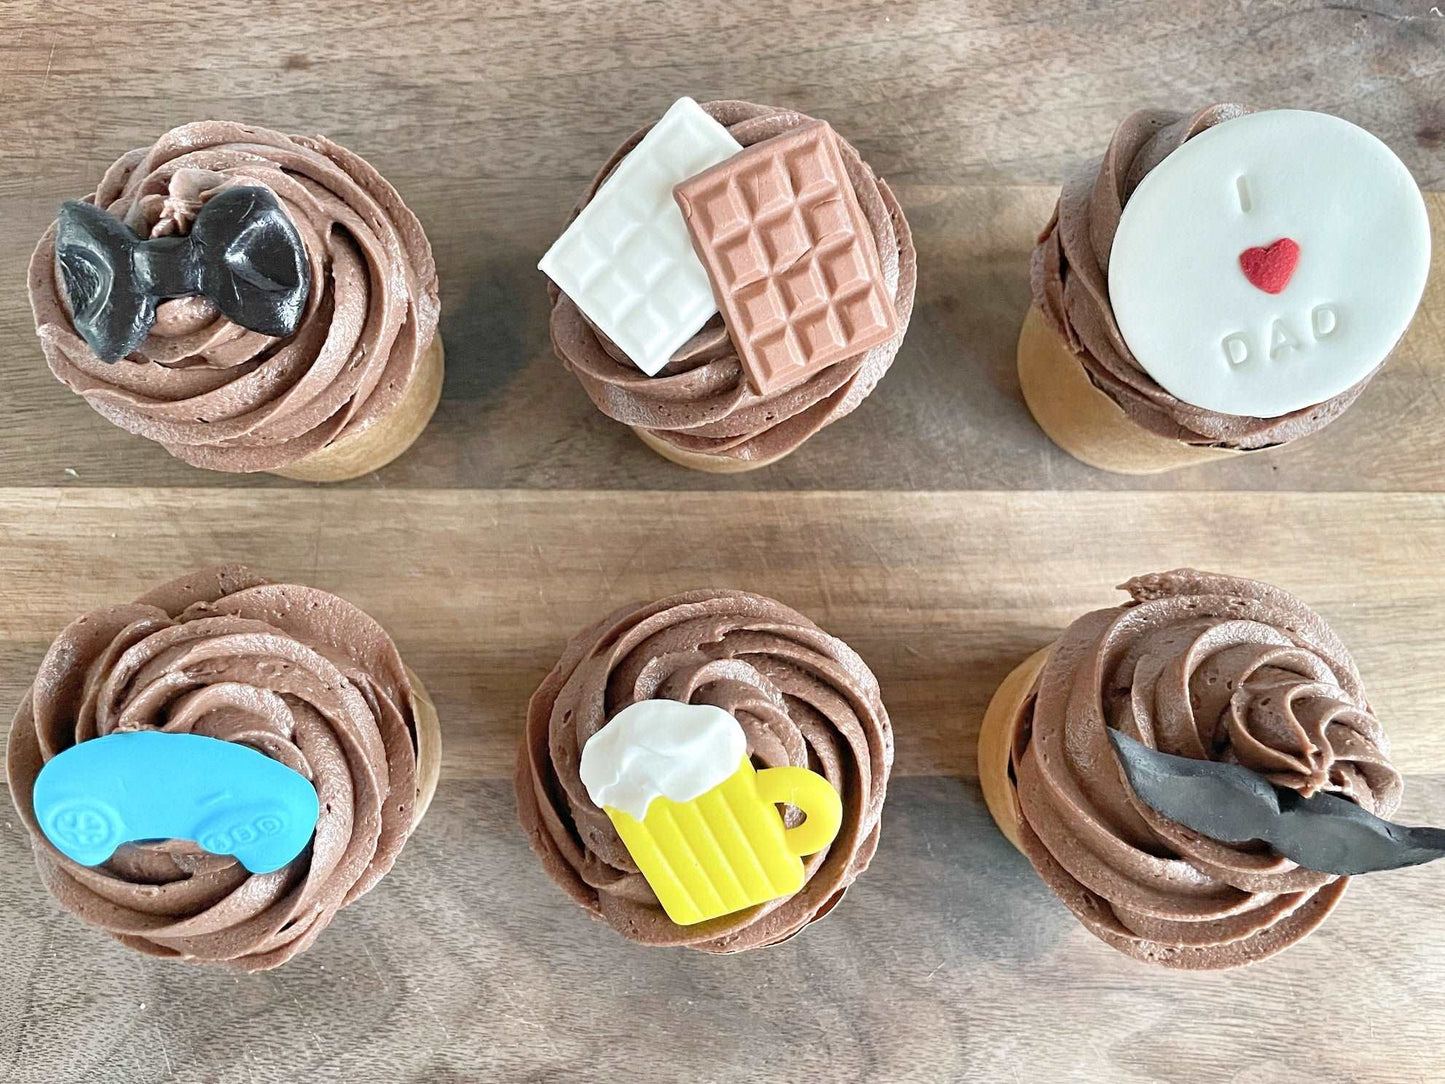 Fathers Day Cupcake Kit, Fathers Day Present, Fathers Day Gift, Fathers Day Cupcakes, Beer Cupcake, Moustache Cupcake, Gamer Control Cupcake, I love you dad Cupcake, Bow Tie Cupcake